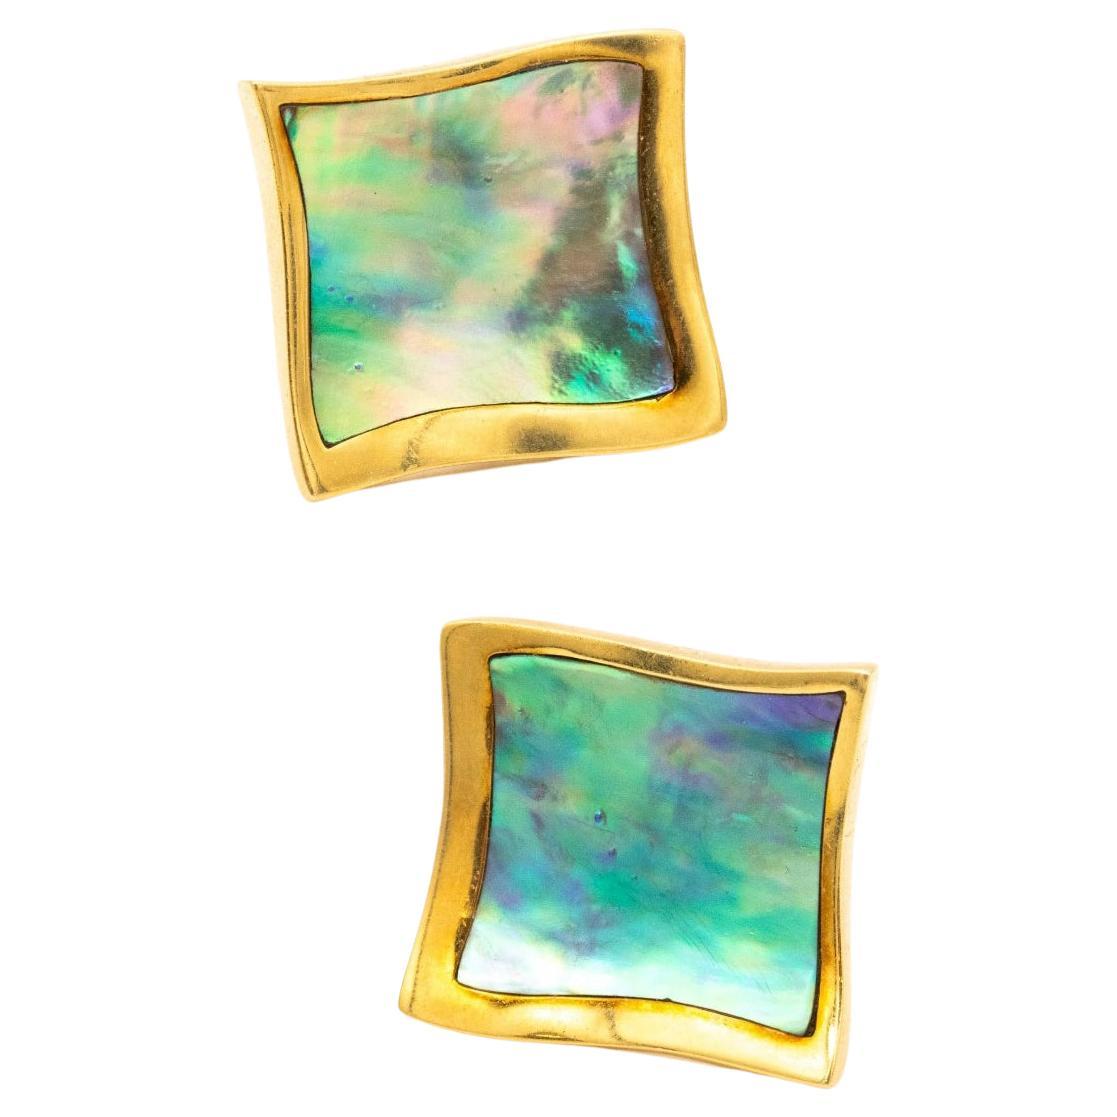 Angela Cummings 1980 Rare Squared Earrings 18Kt Yellow Gold with Abalone Shell